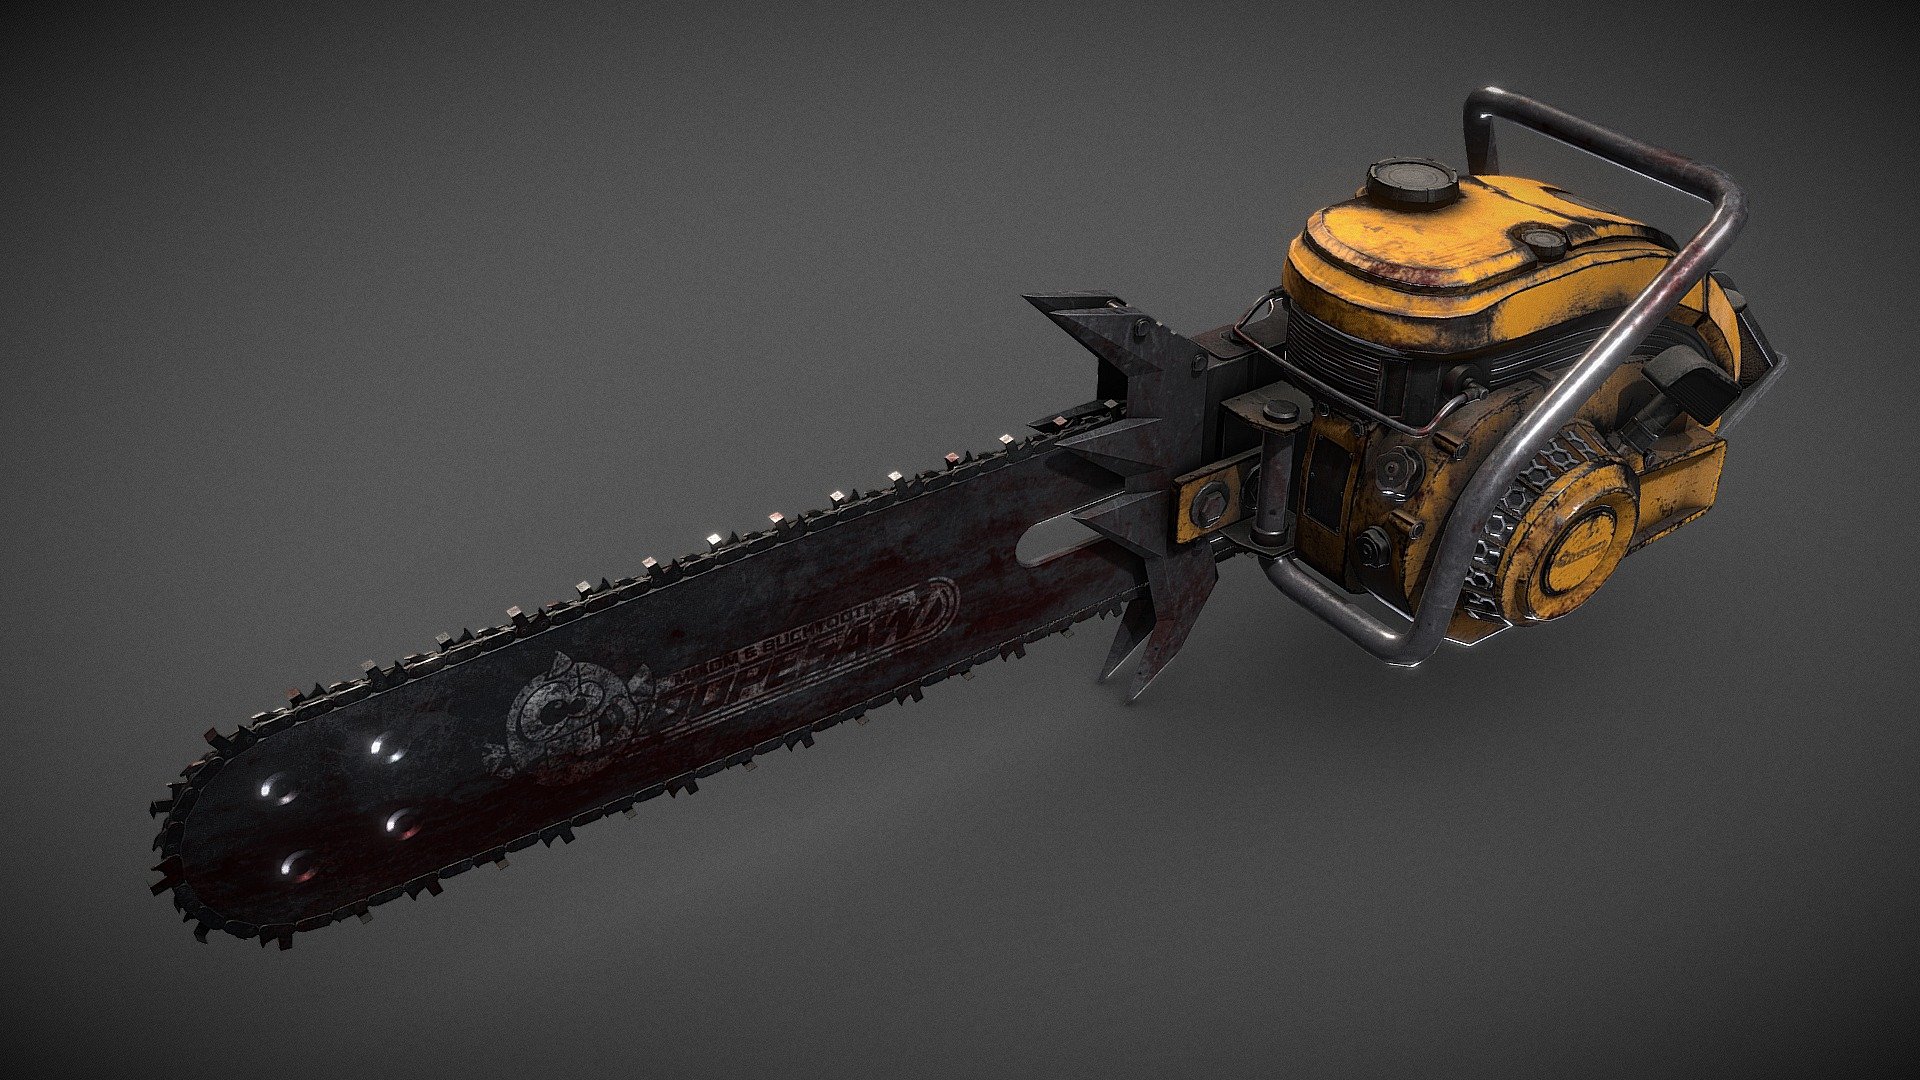 Game-ready chainsaw model based on the original concepts from id Software's DOOM Eternal.
See the high quality and Unreal Engine 4 renders here: https://www.artstation.com/artwork/L3evKR

Polycount
Faces: 16.739
Tris: 32.578

Material
This model uses one PBR material with 4K textures including:
Base Color, Roughness, Metallic, Ambient Occlusion and Normal - Doom Eternal Chainsaw - Buy Royalty Free 3D model by Diogo Azambuja (@diogoaza) 3d model